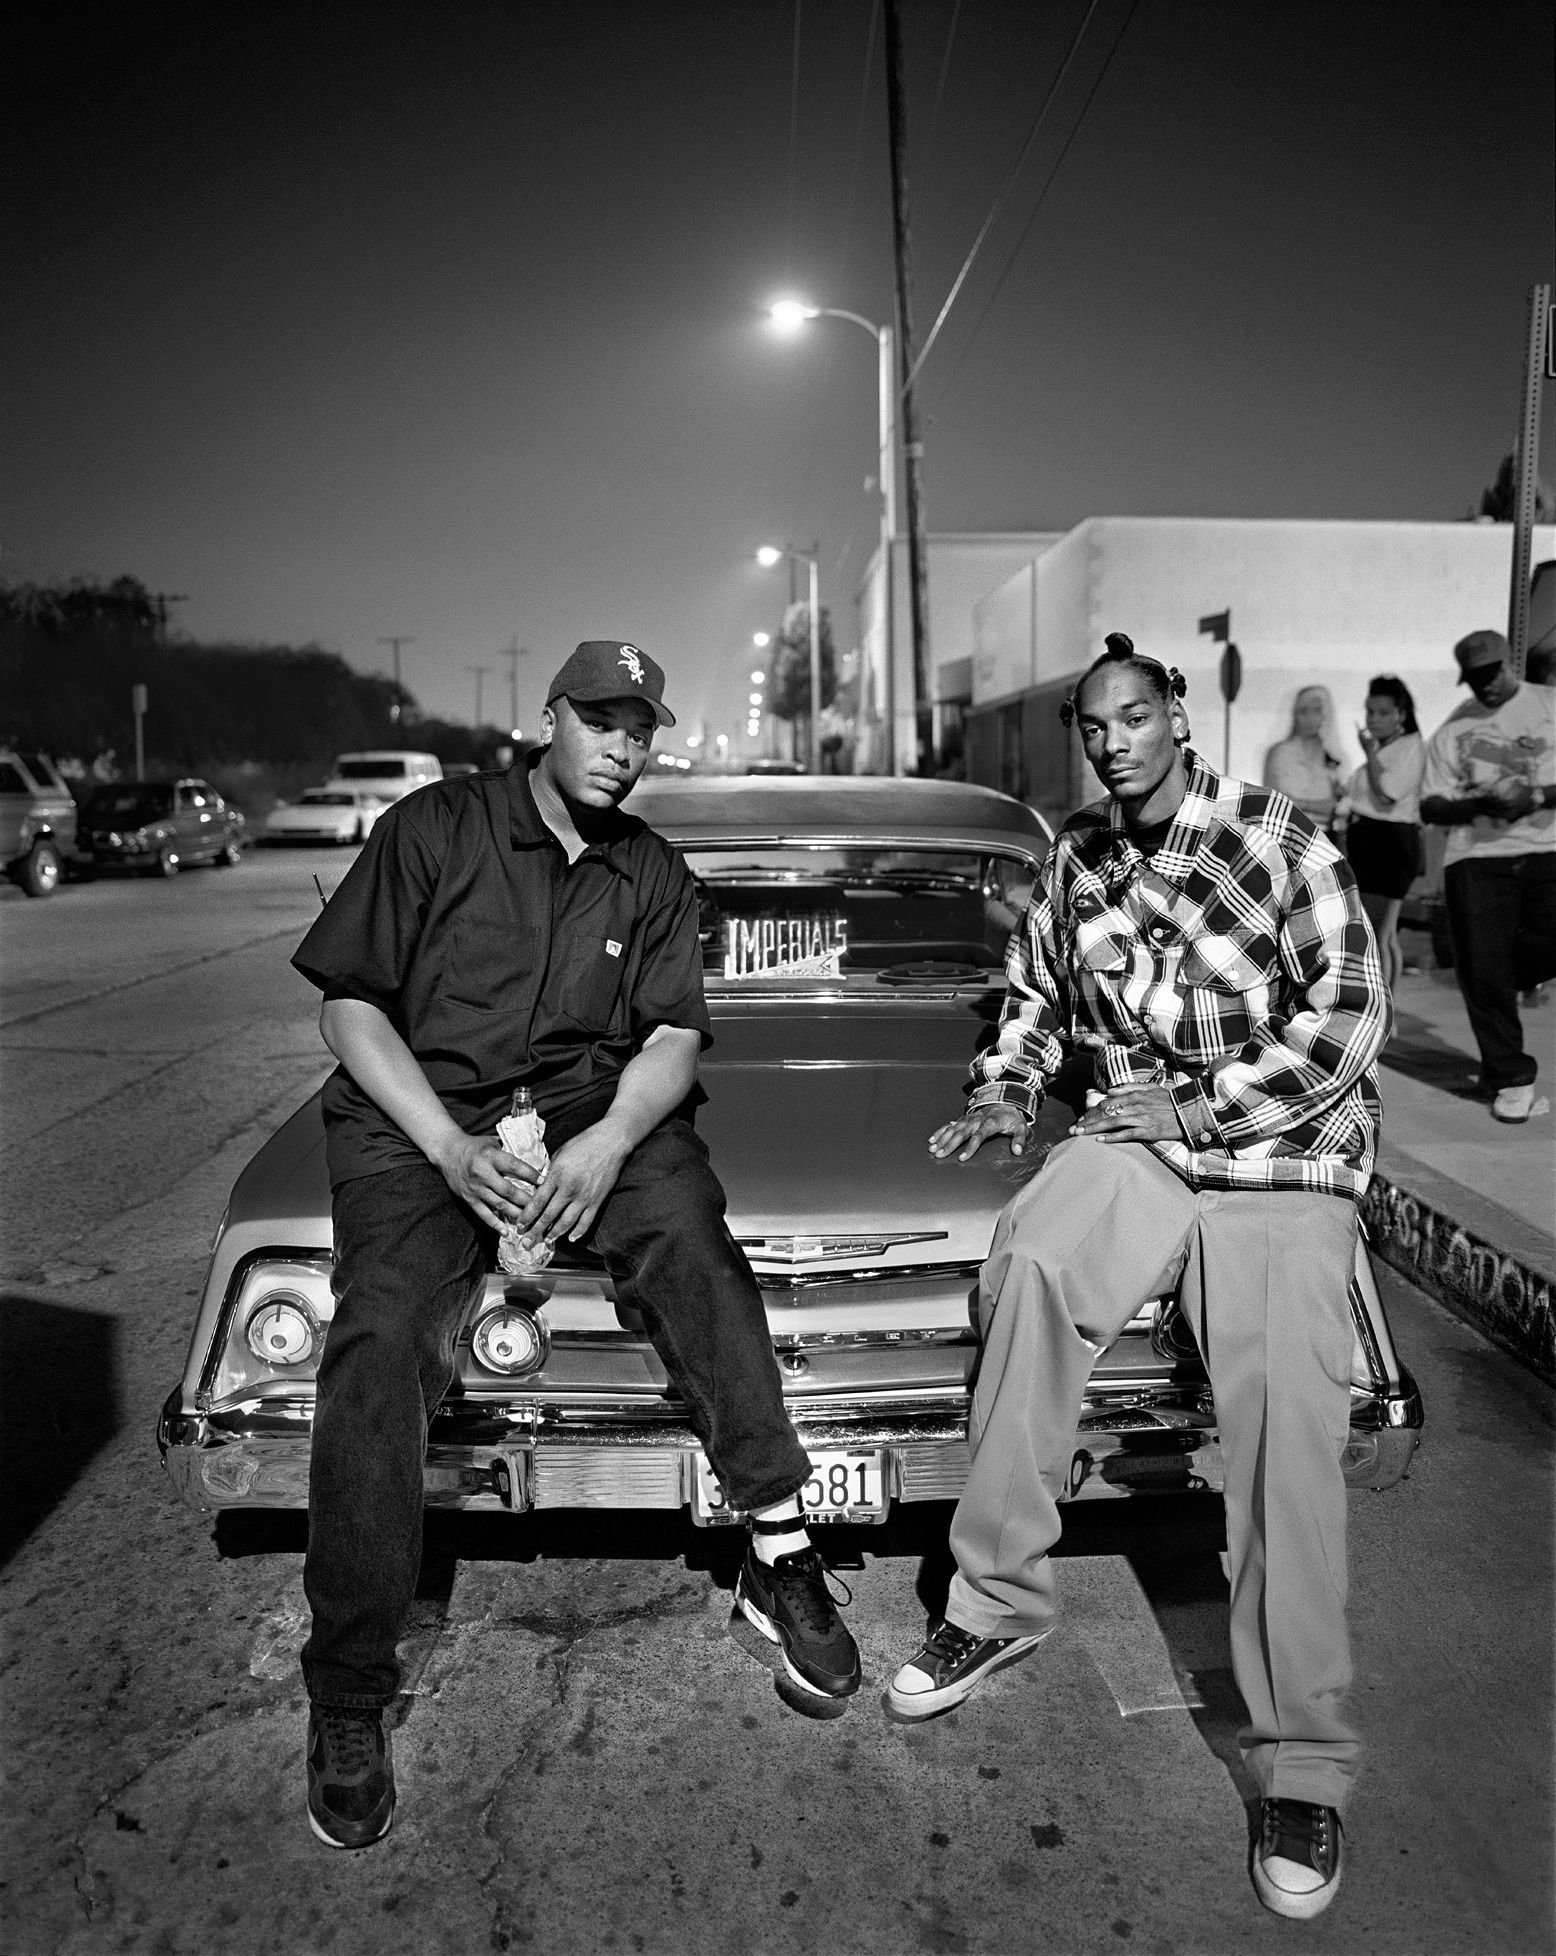 Classic Image From Artnet's Hip Hop Photography Sale